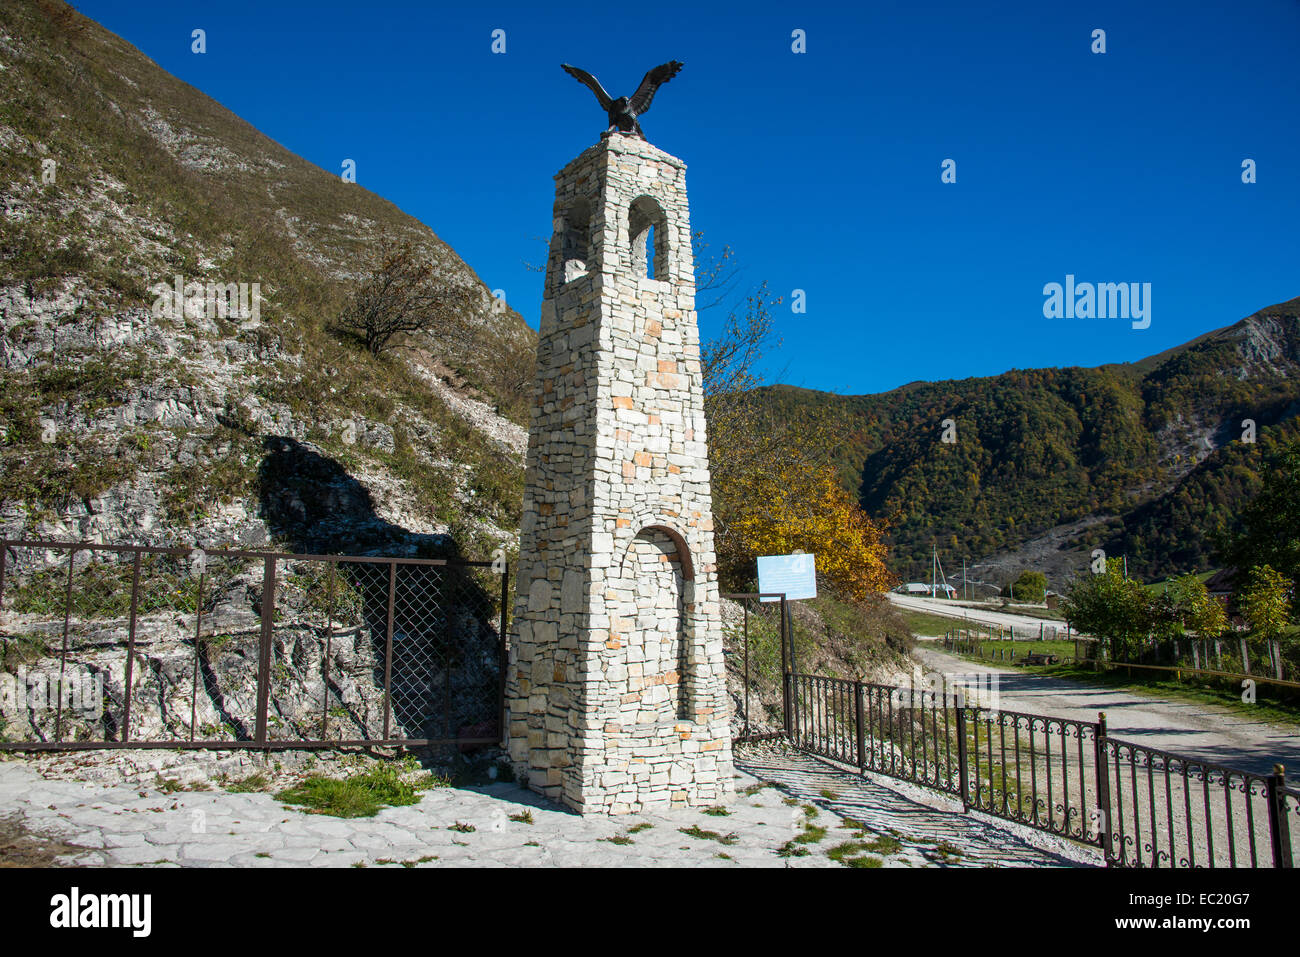 Monument for the Chechen warrior Zelimxan in the Chechen mountains, Chechnya, Caucasus, Russia Stock Photo